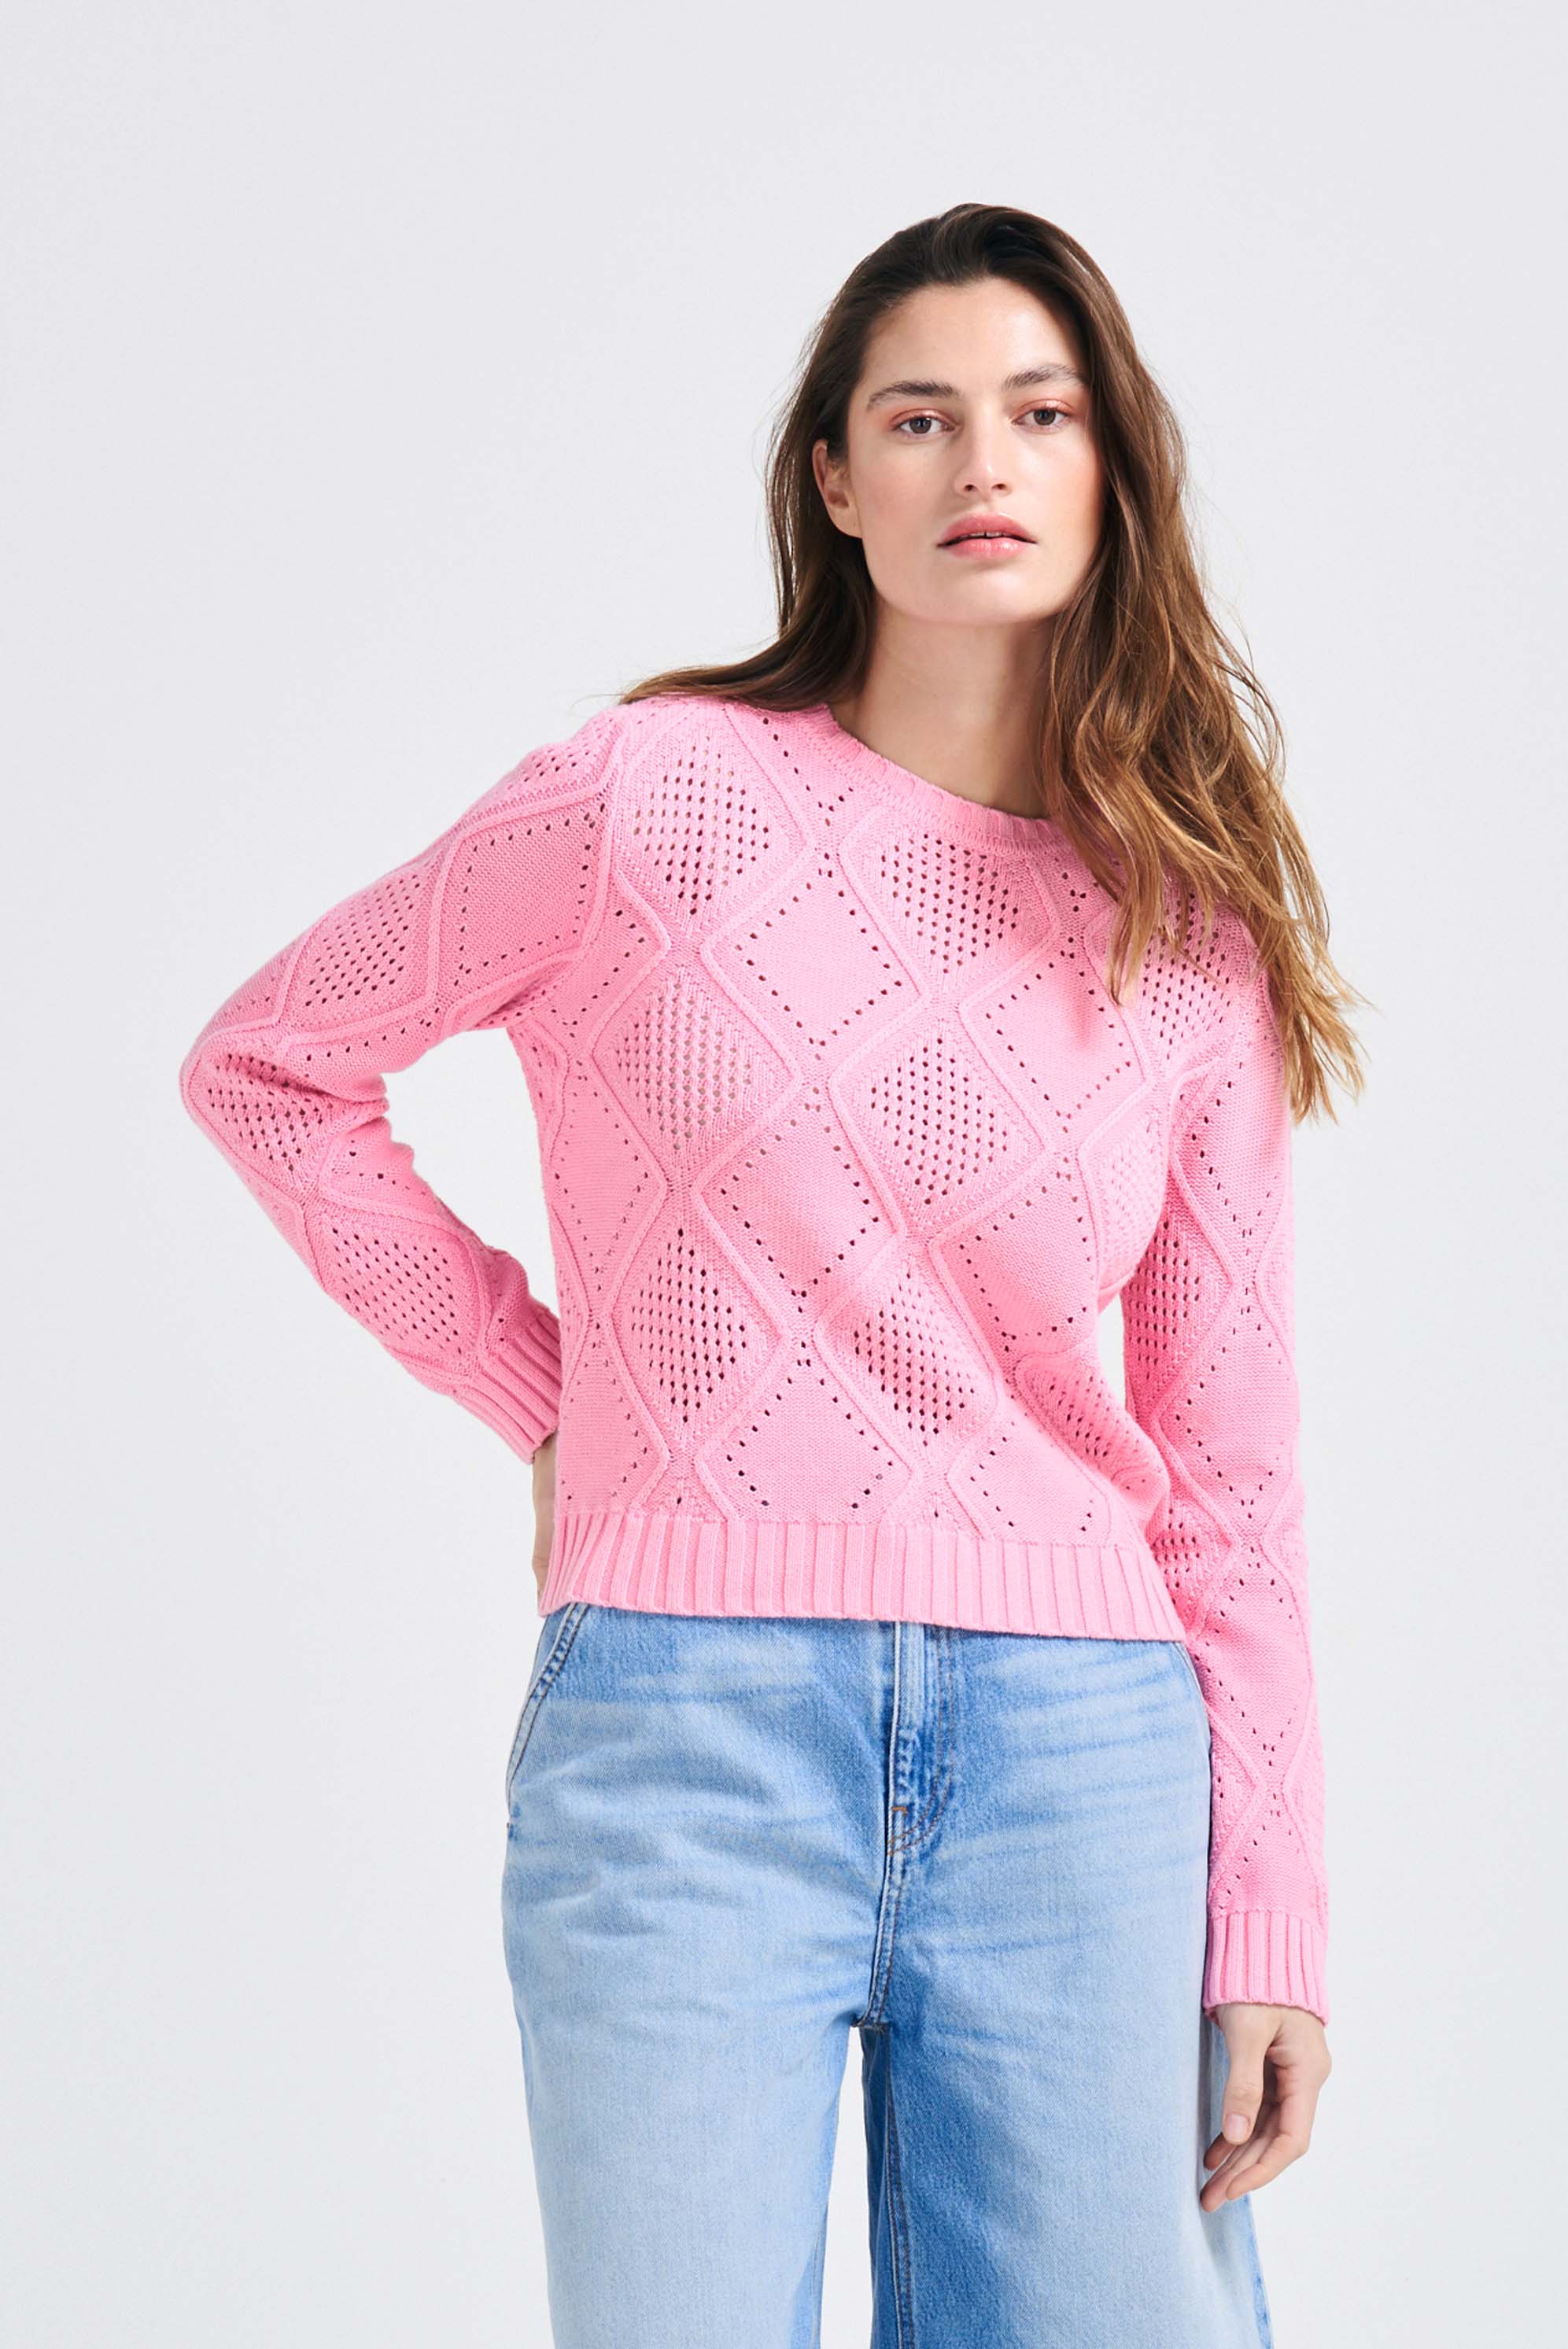 Brown haired female model wearing Jumper1234 Pink cotton crew neck jumper with a diamond texture stitch pattern